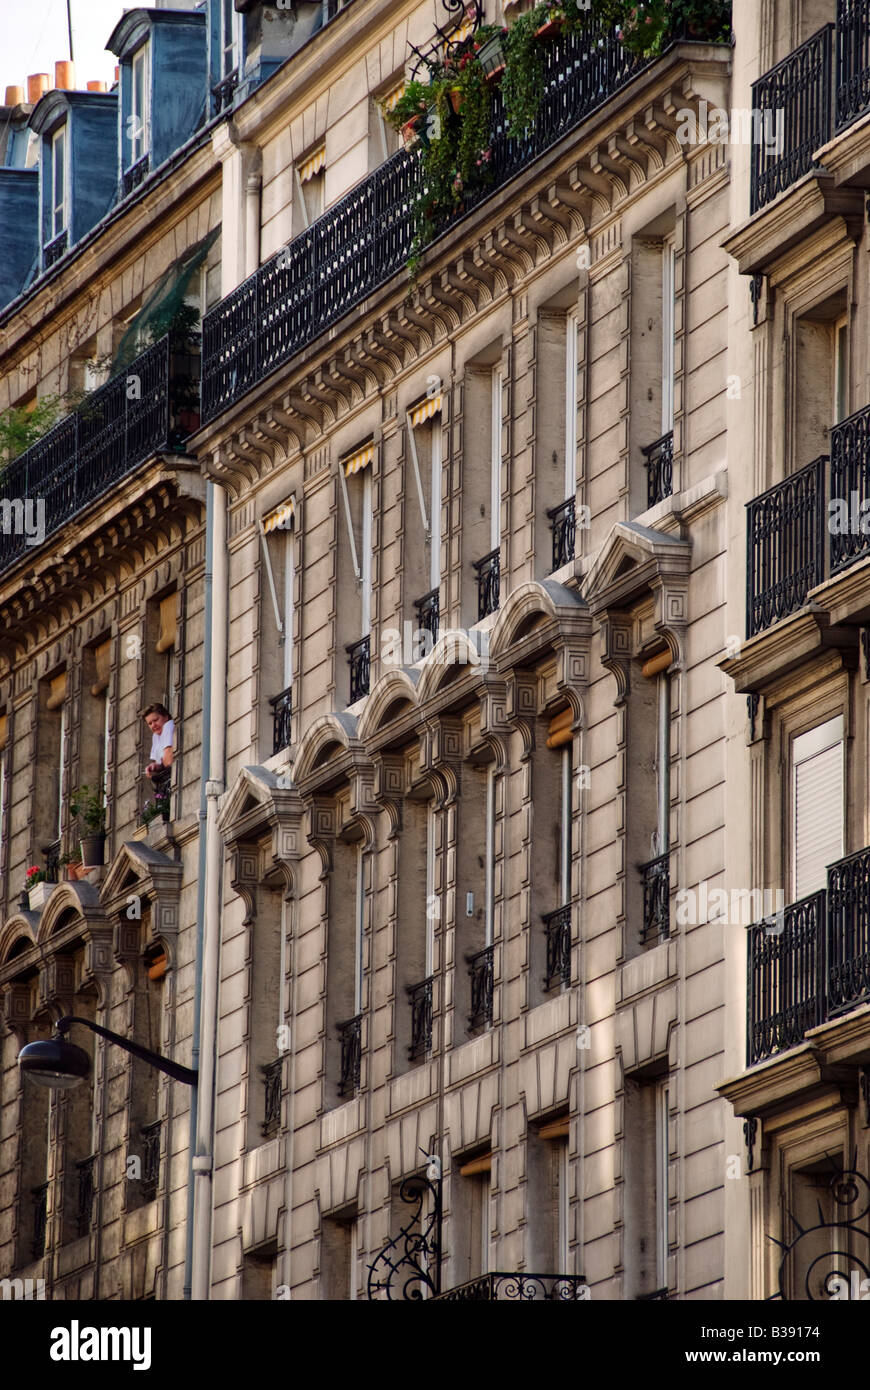 Paris facades of apartments with a woman smoking a cigarette in one of the apartments. Stock Photo